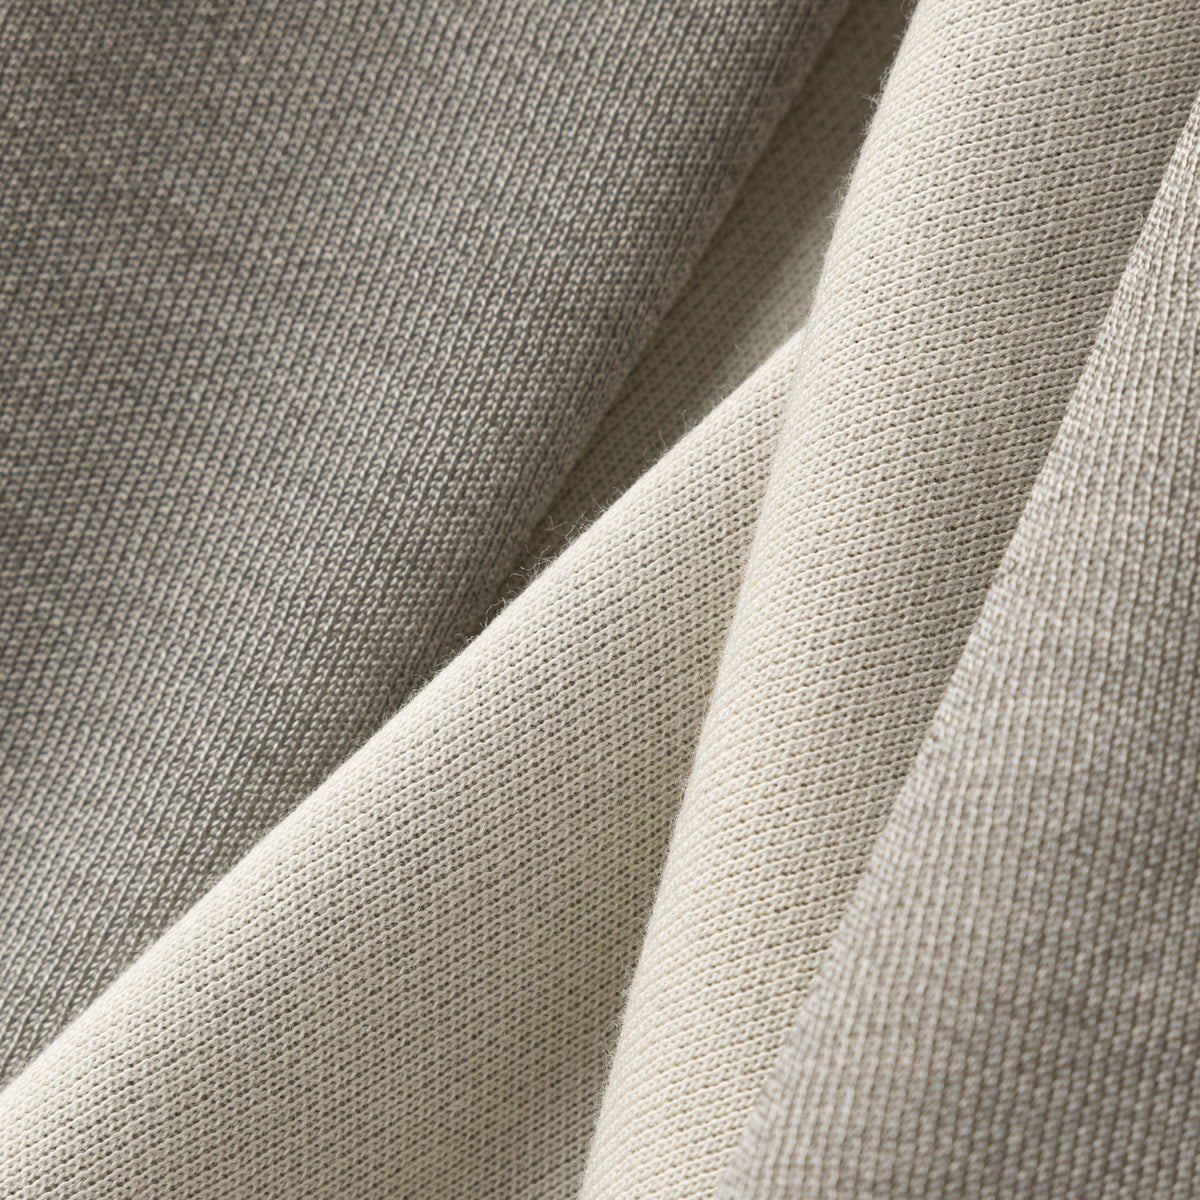 Silver Knit Fabric in Bone White Color, which has excellet EMF shielding performance while maintian the  softness and asethical looking just like regular fabric